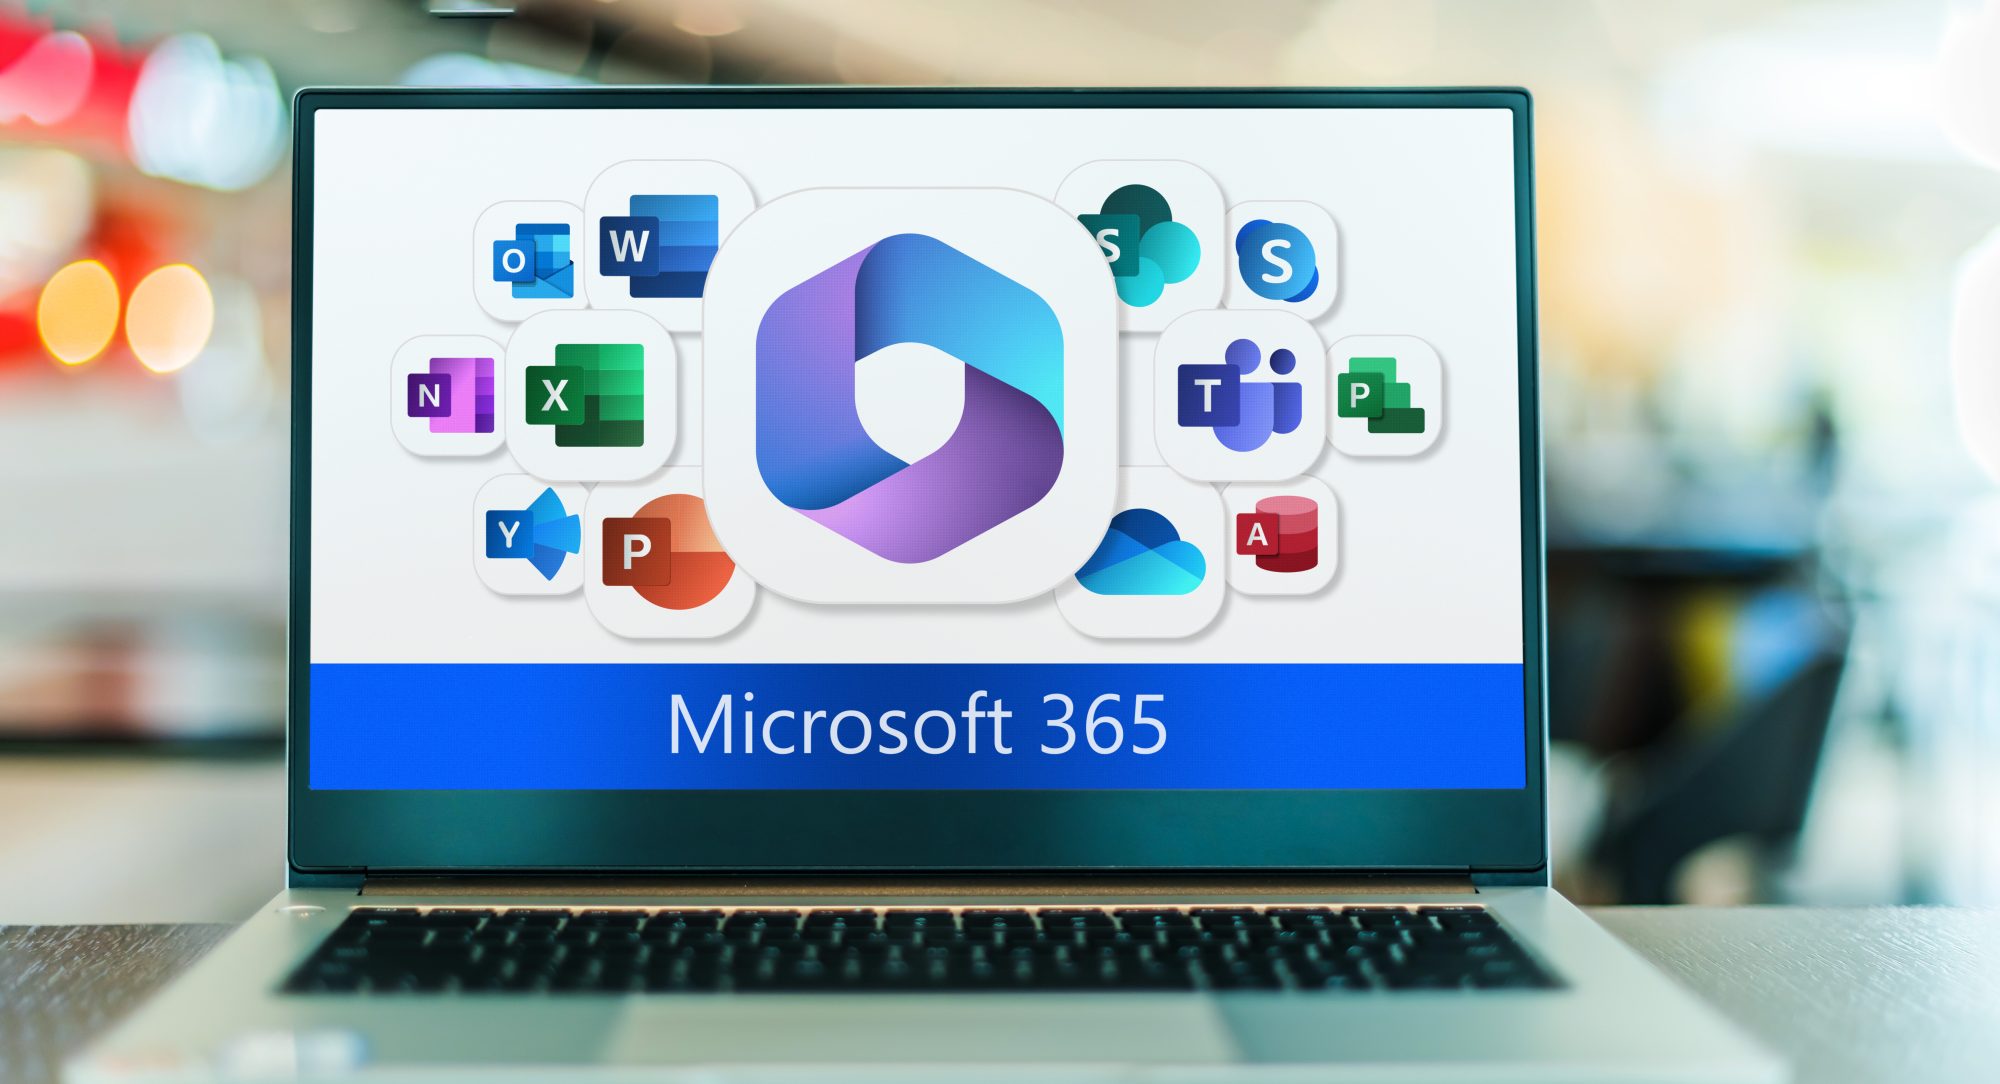 A laptop screen displaying various Microsoft 365 app icons, including Outlook, Word, Excel, PowerPoint, OneNote, SharePoint, Teams, and others surrounding a central Windows 365 logo.